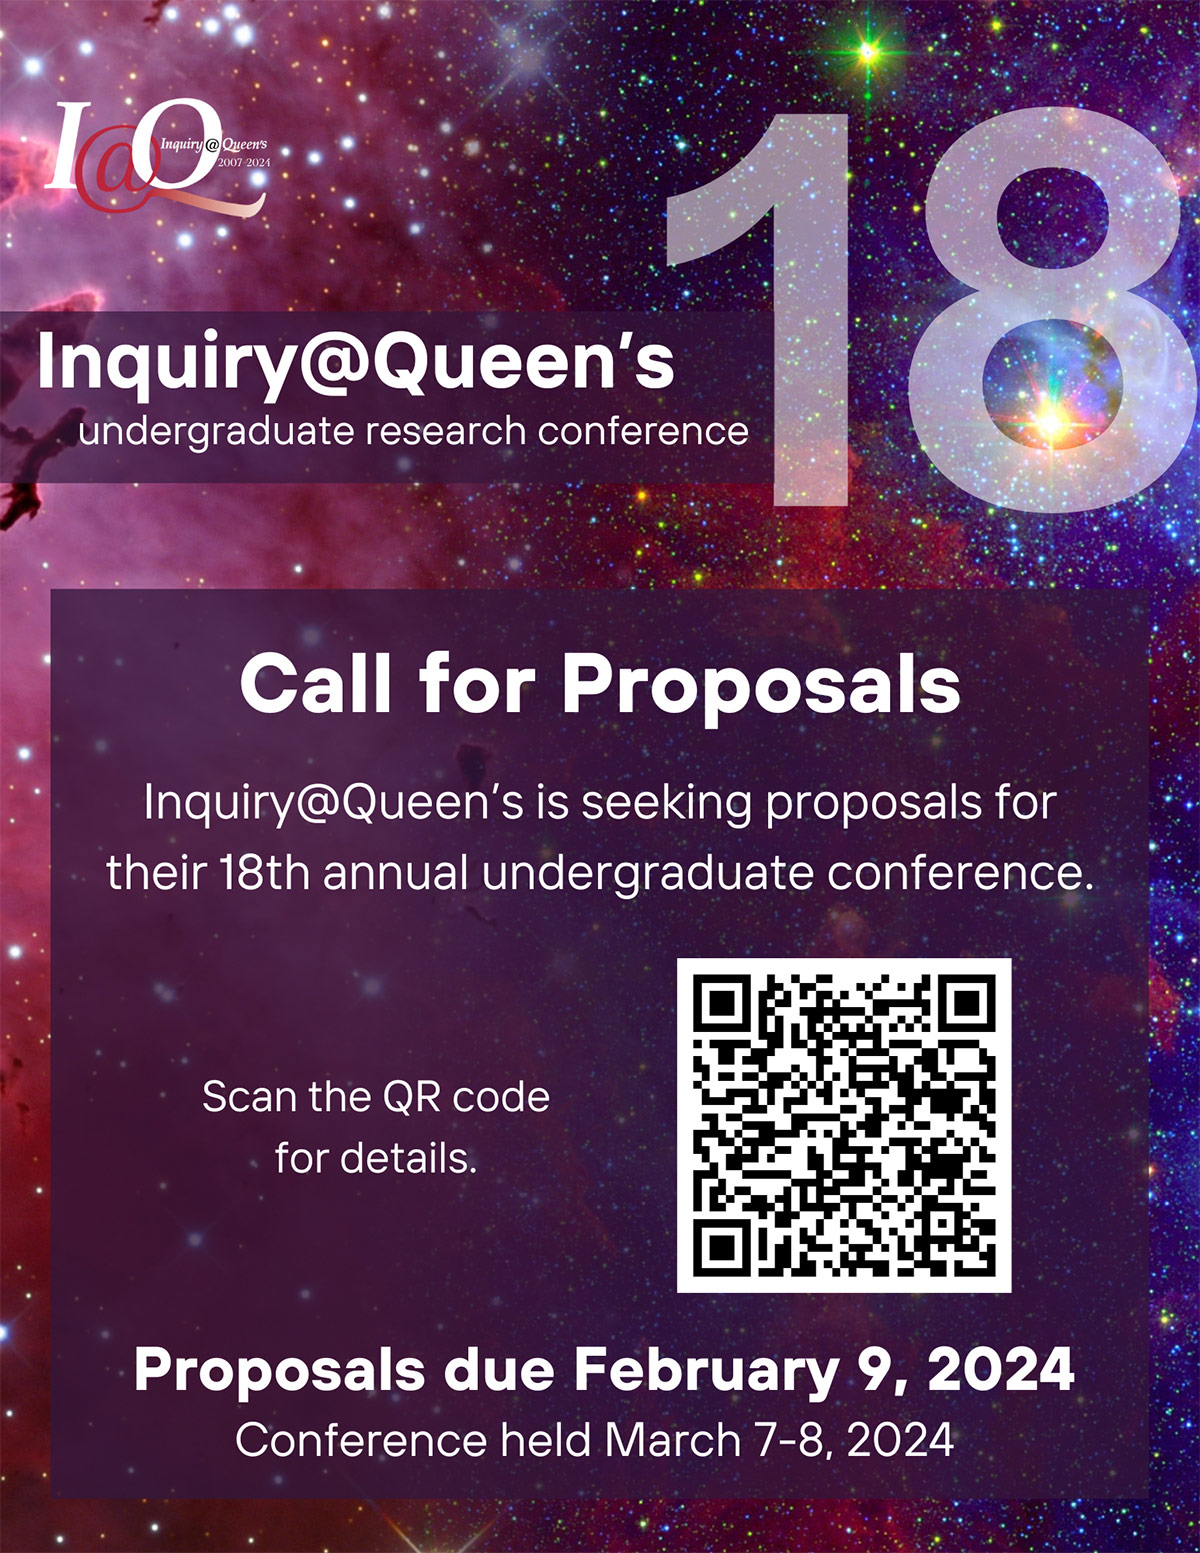 Proposal calls for the 18th annual I@Q Conference at Queen's University, Kingston, Ontario, Canada